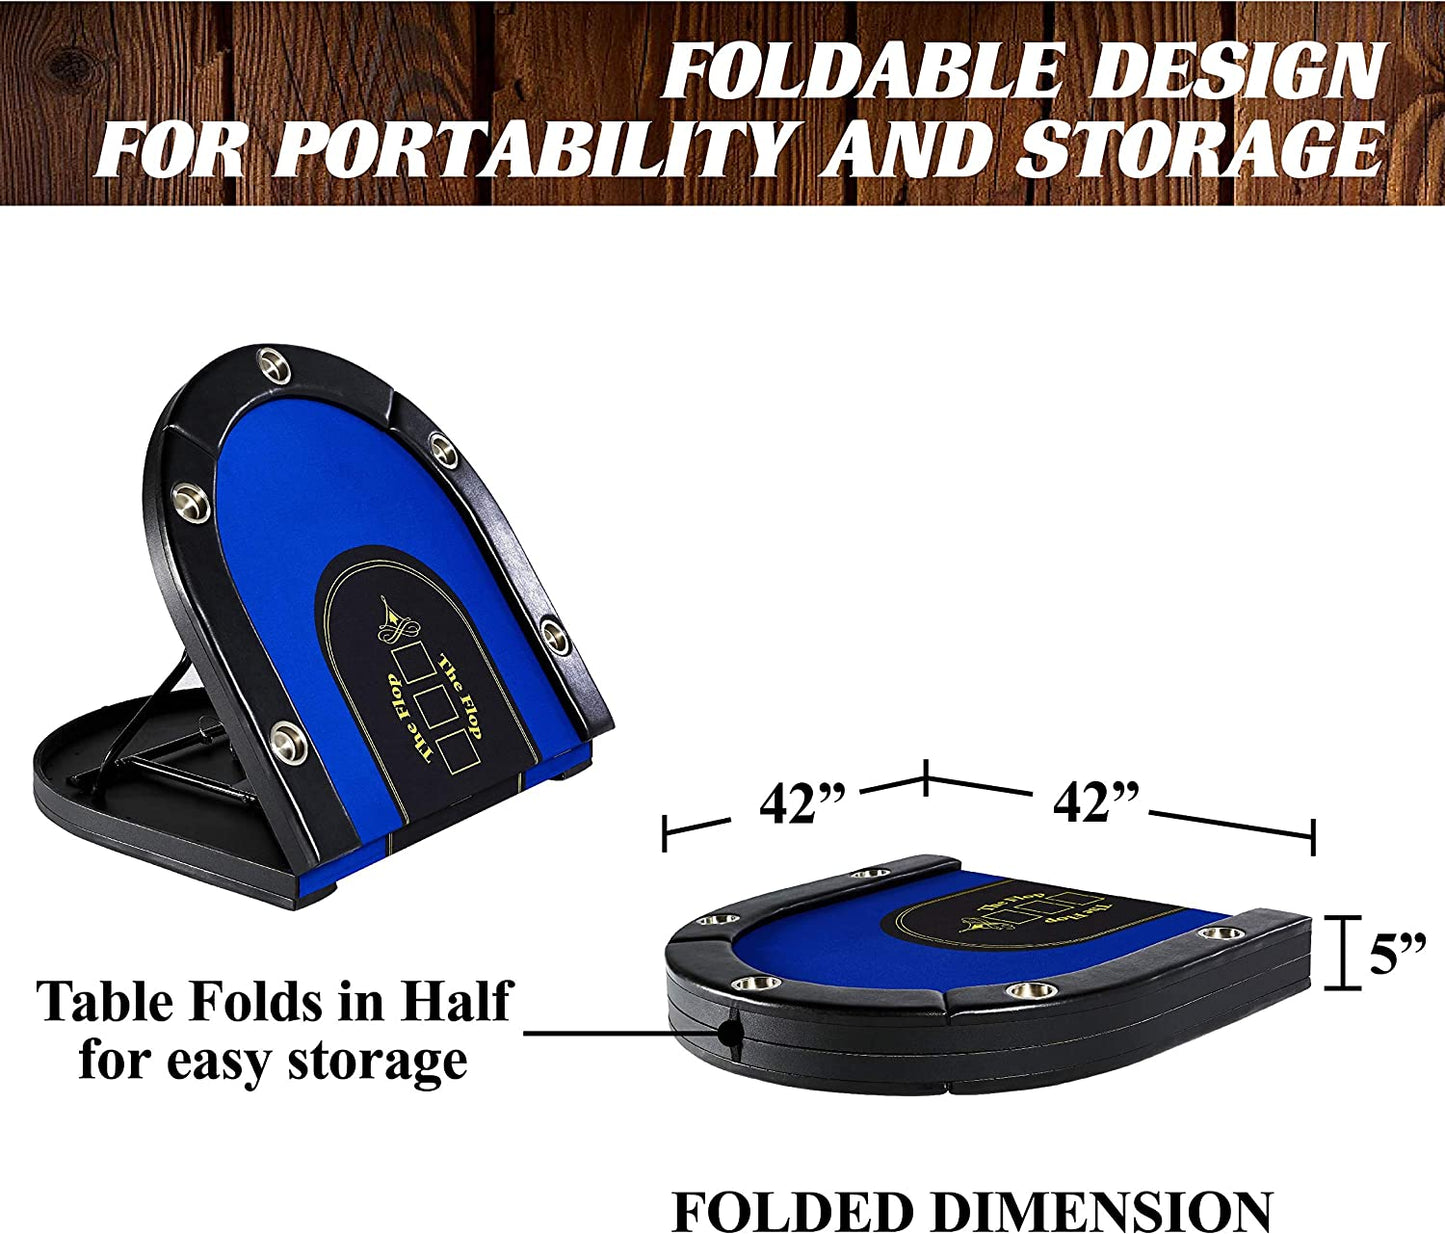 Size dimensions for a 10 player folding poker table. The measures when folded are 42 inches x 42 inches. The text says, 'Foldable design for portability and storage.'